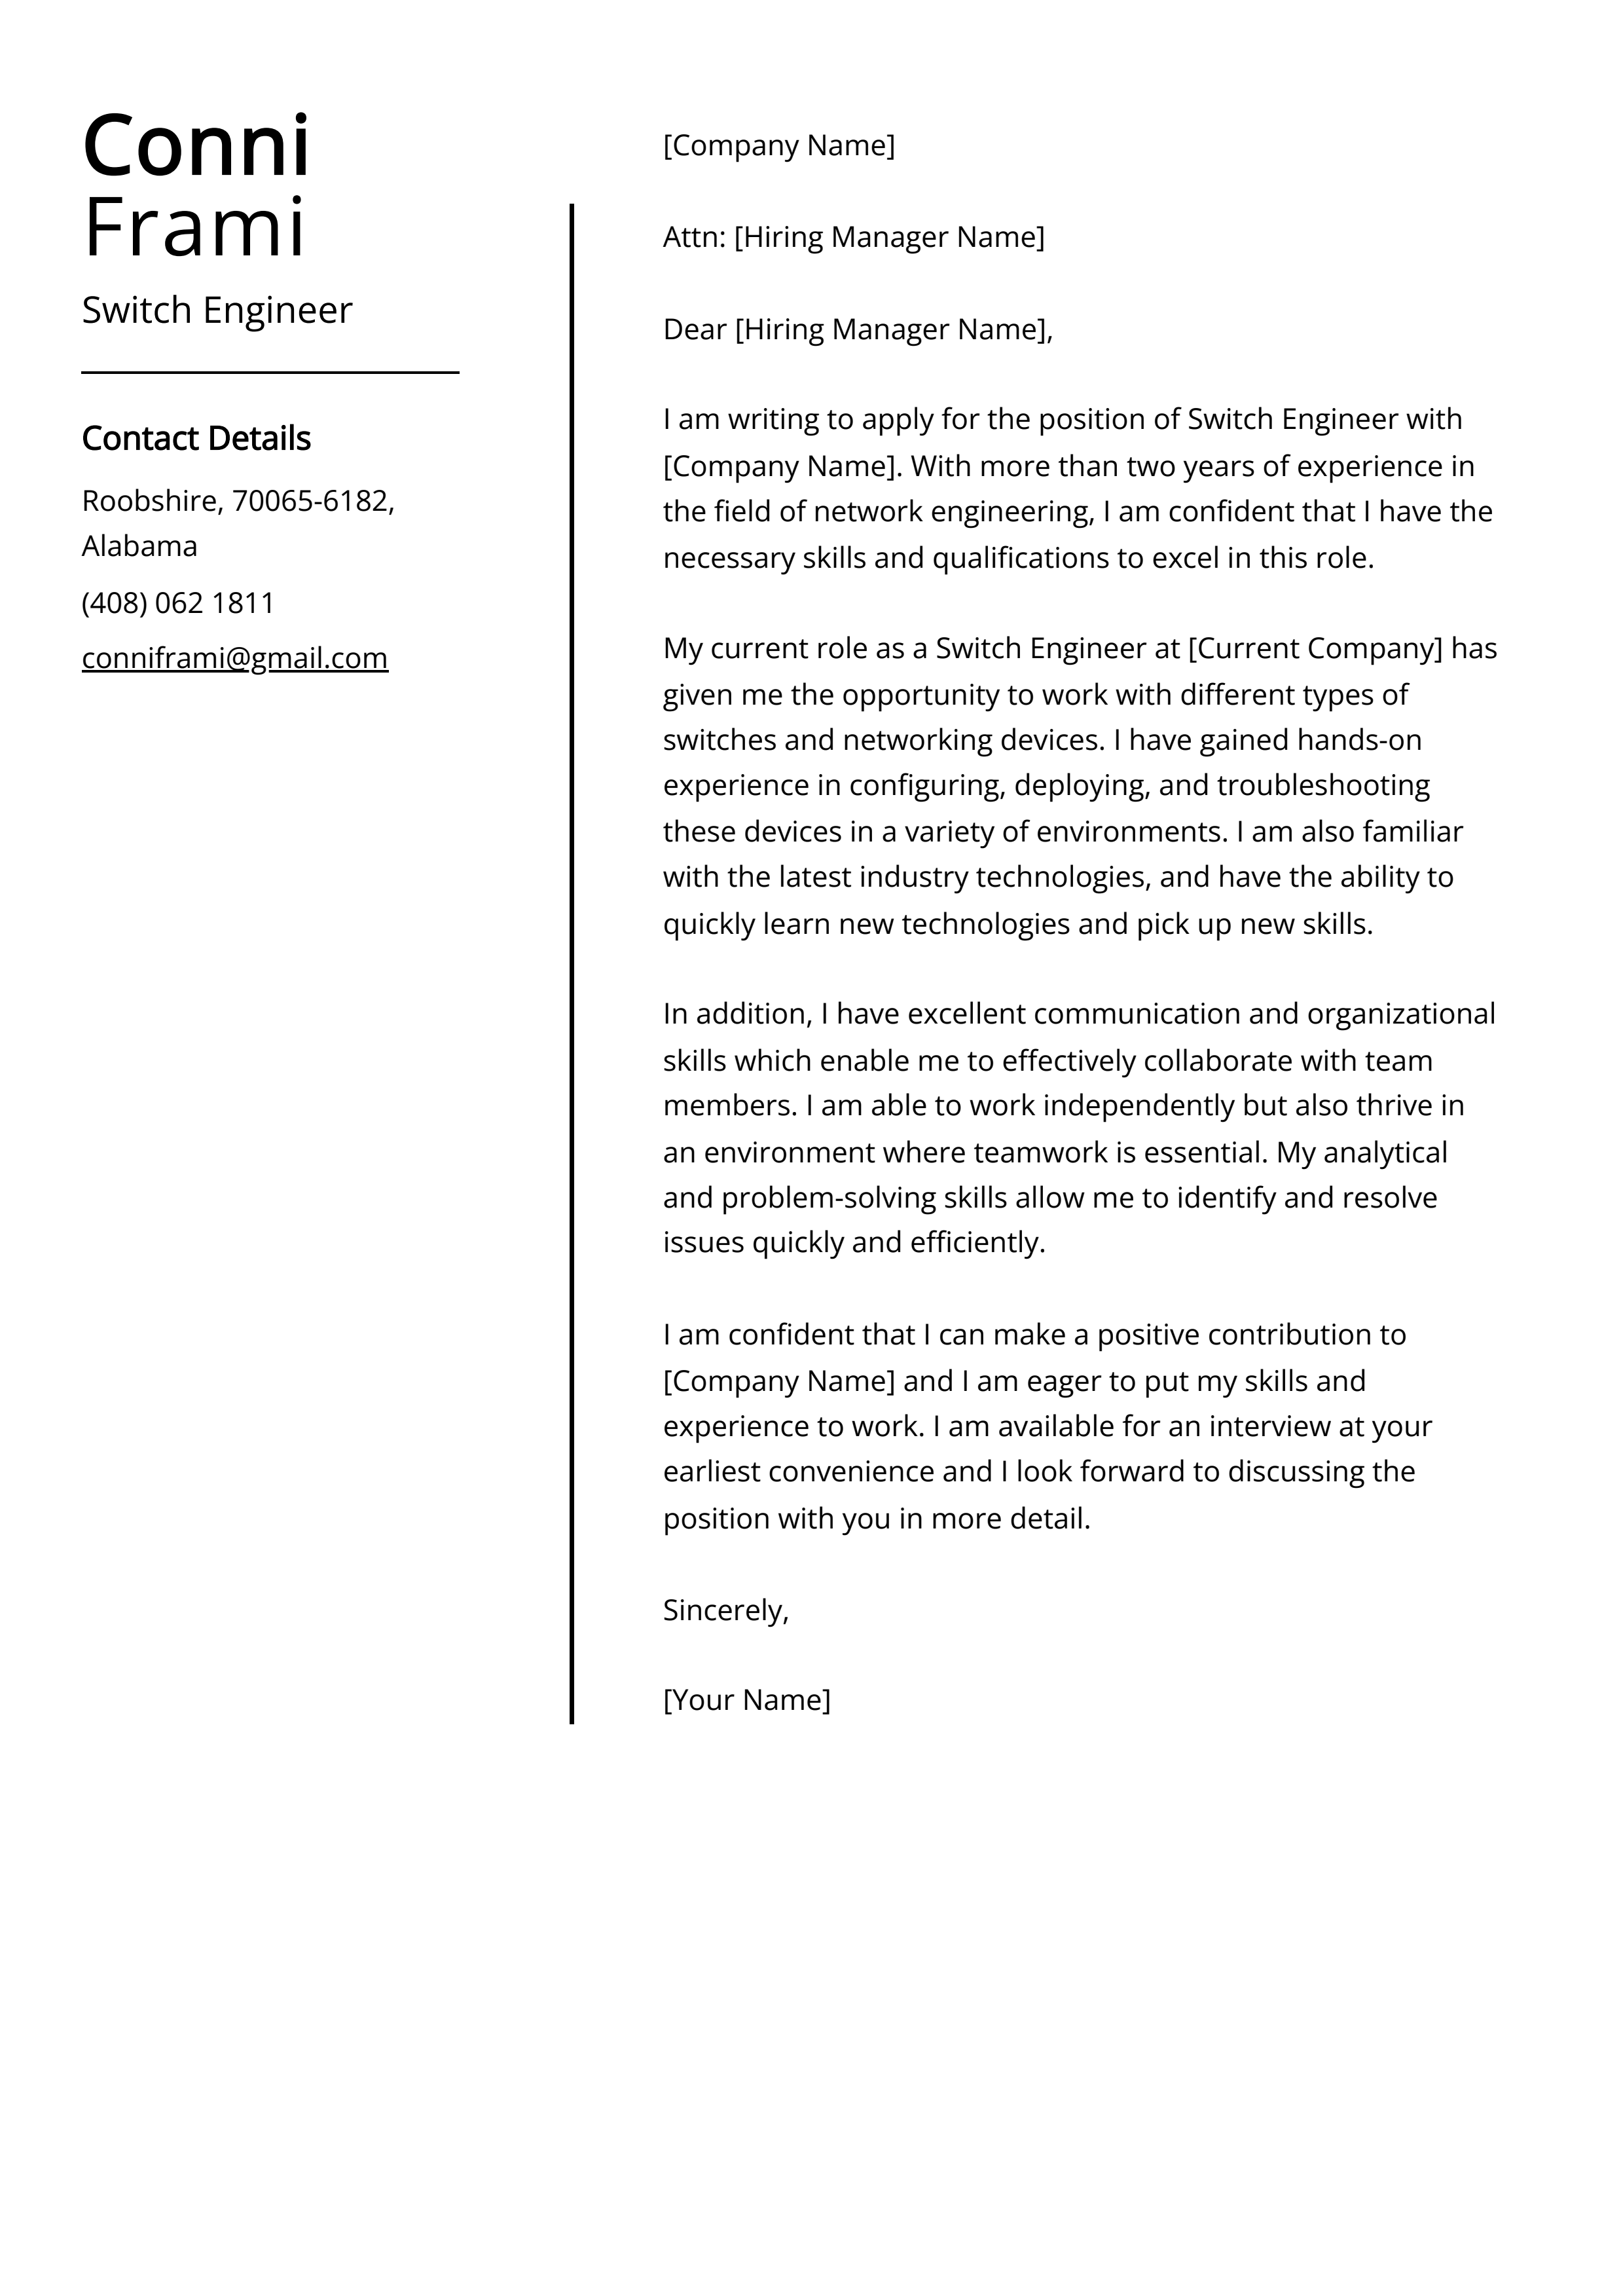 Switch Engineer Cover Letter Example